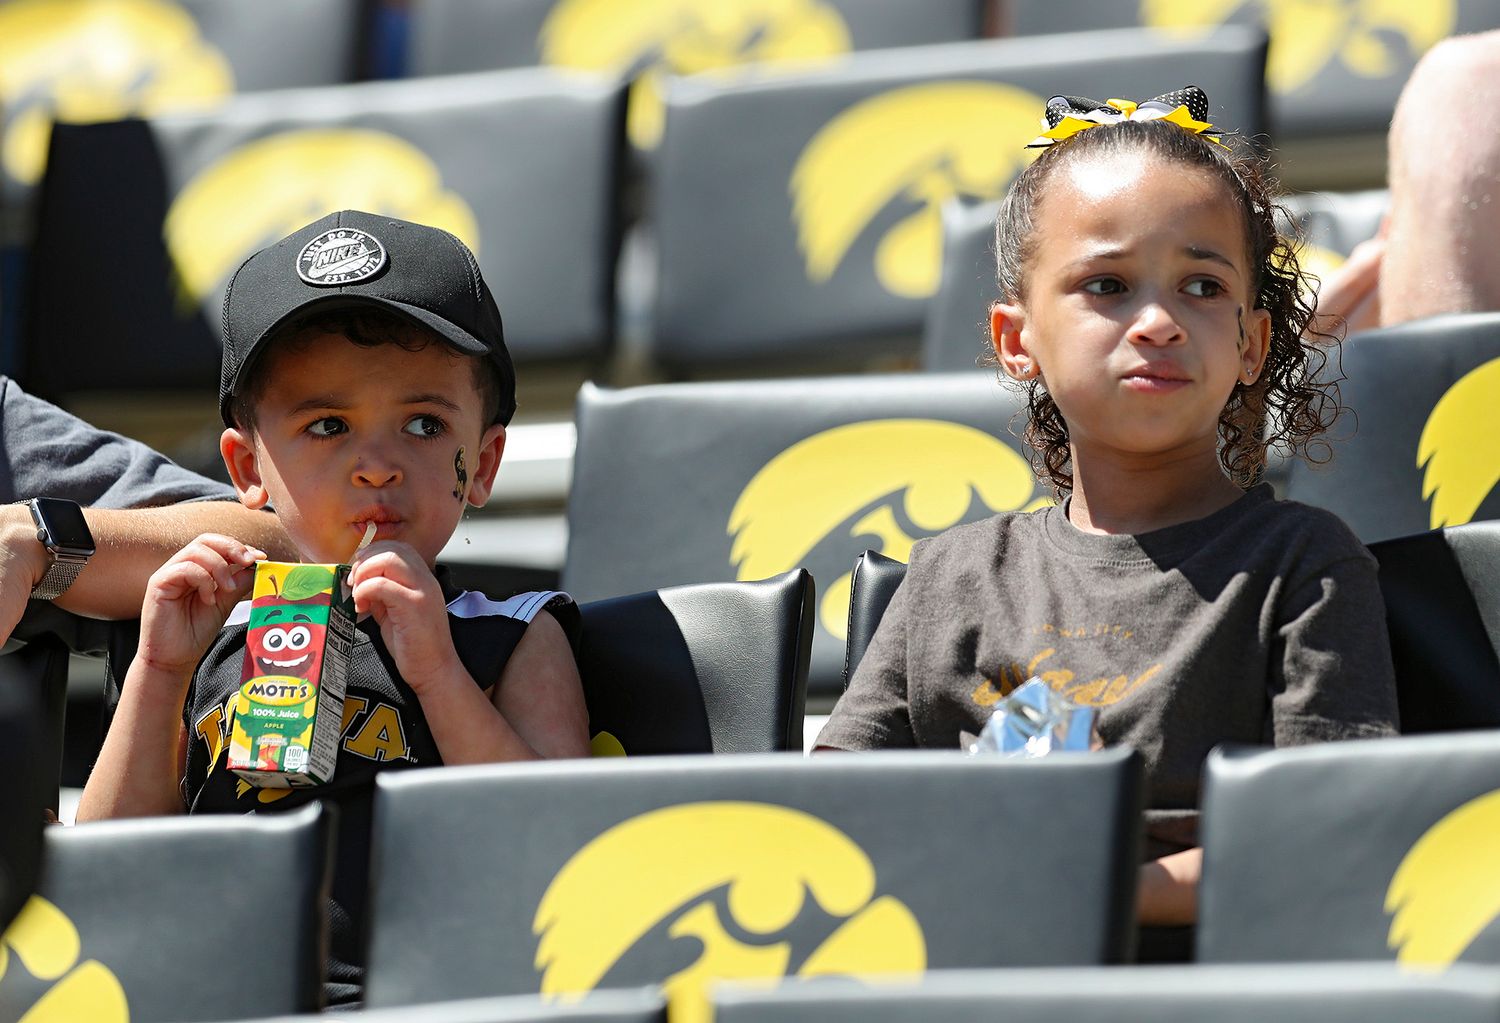 “KIDS’ Day AT KINNICK” Announced; JUNIOR HAWK CLUB Registrations Now